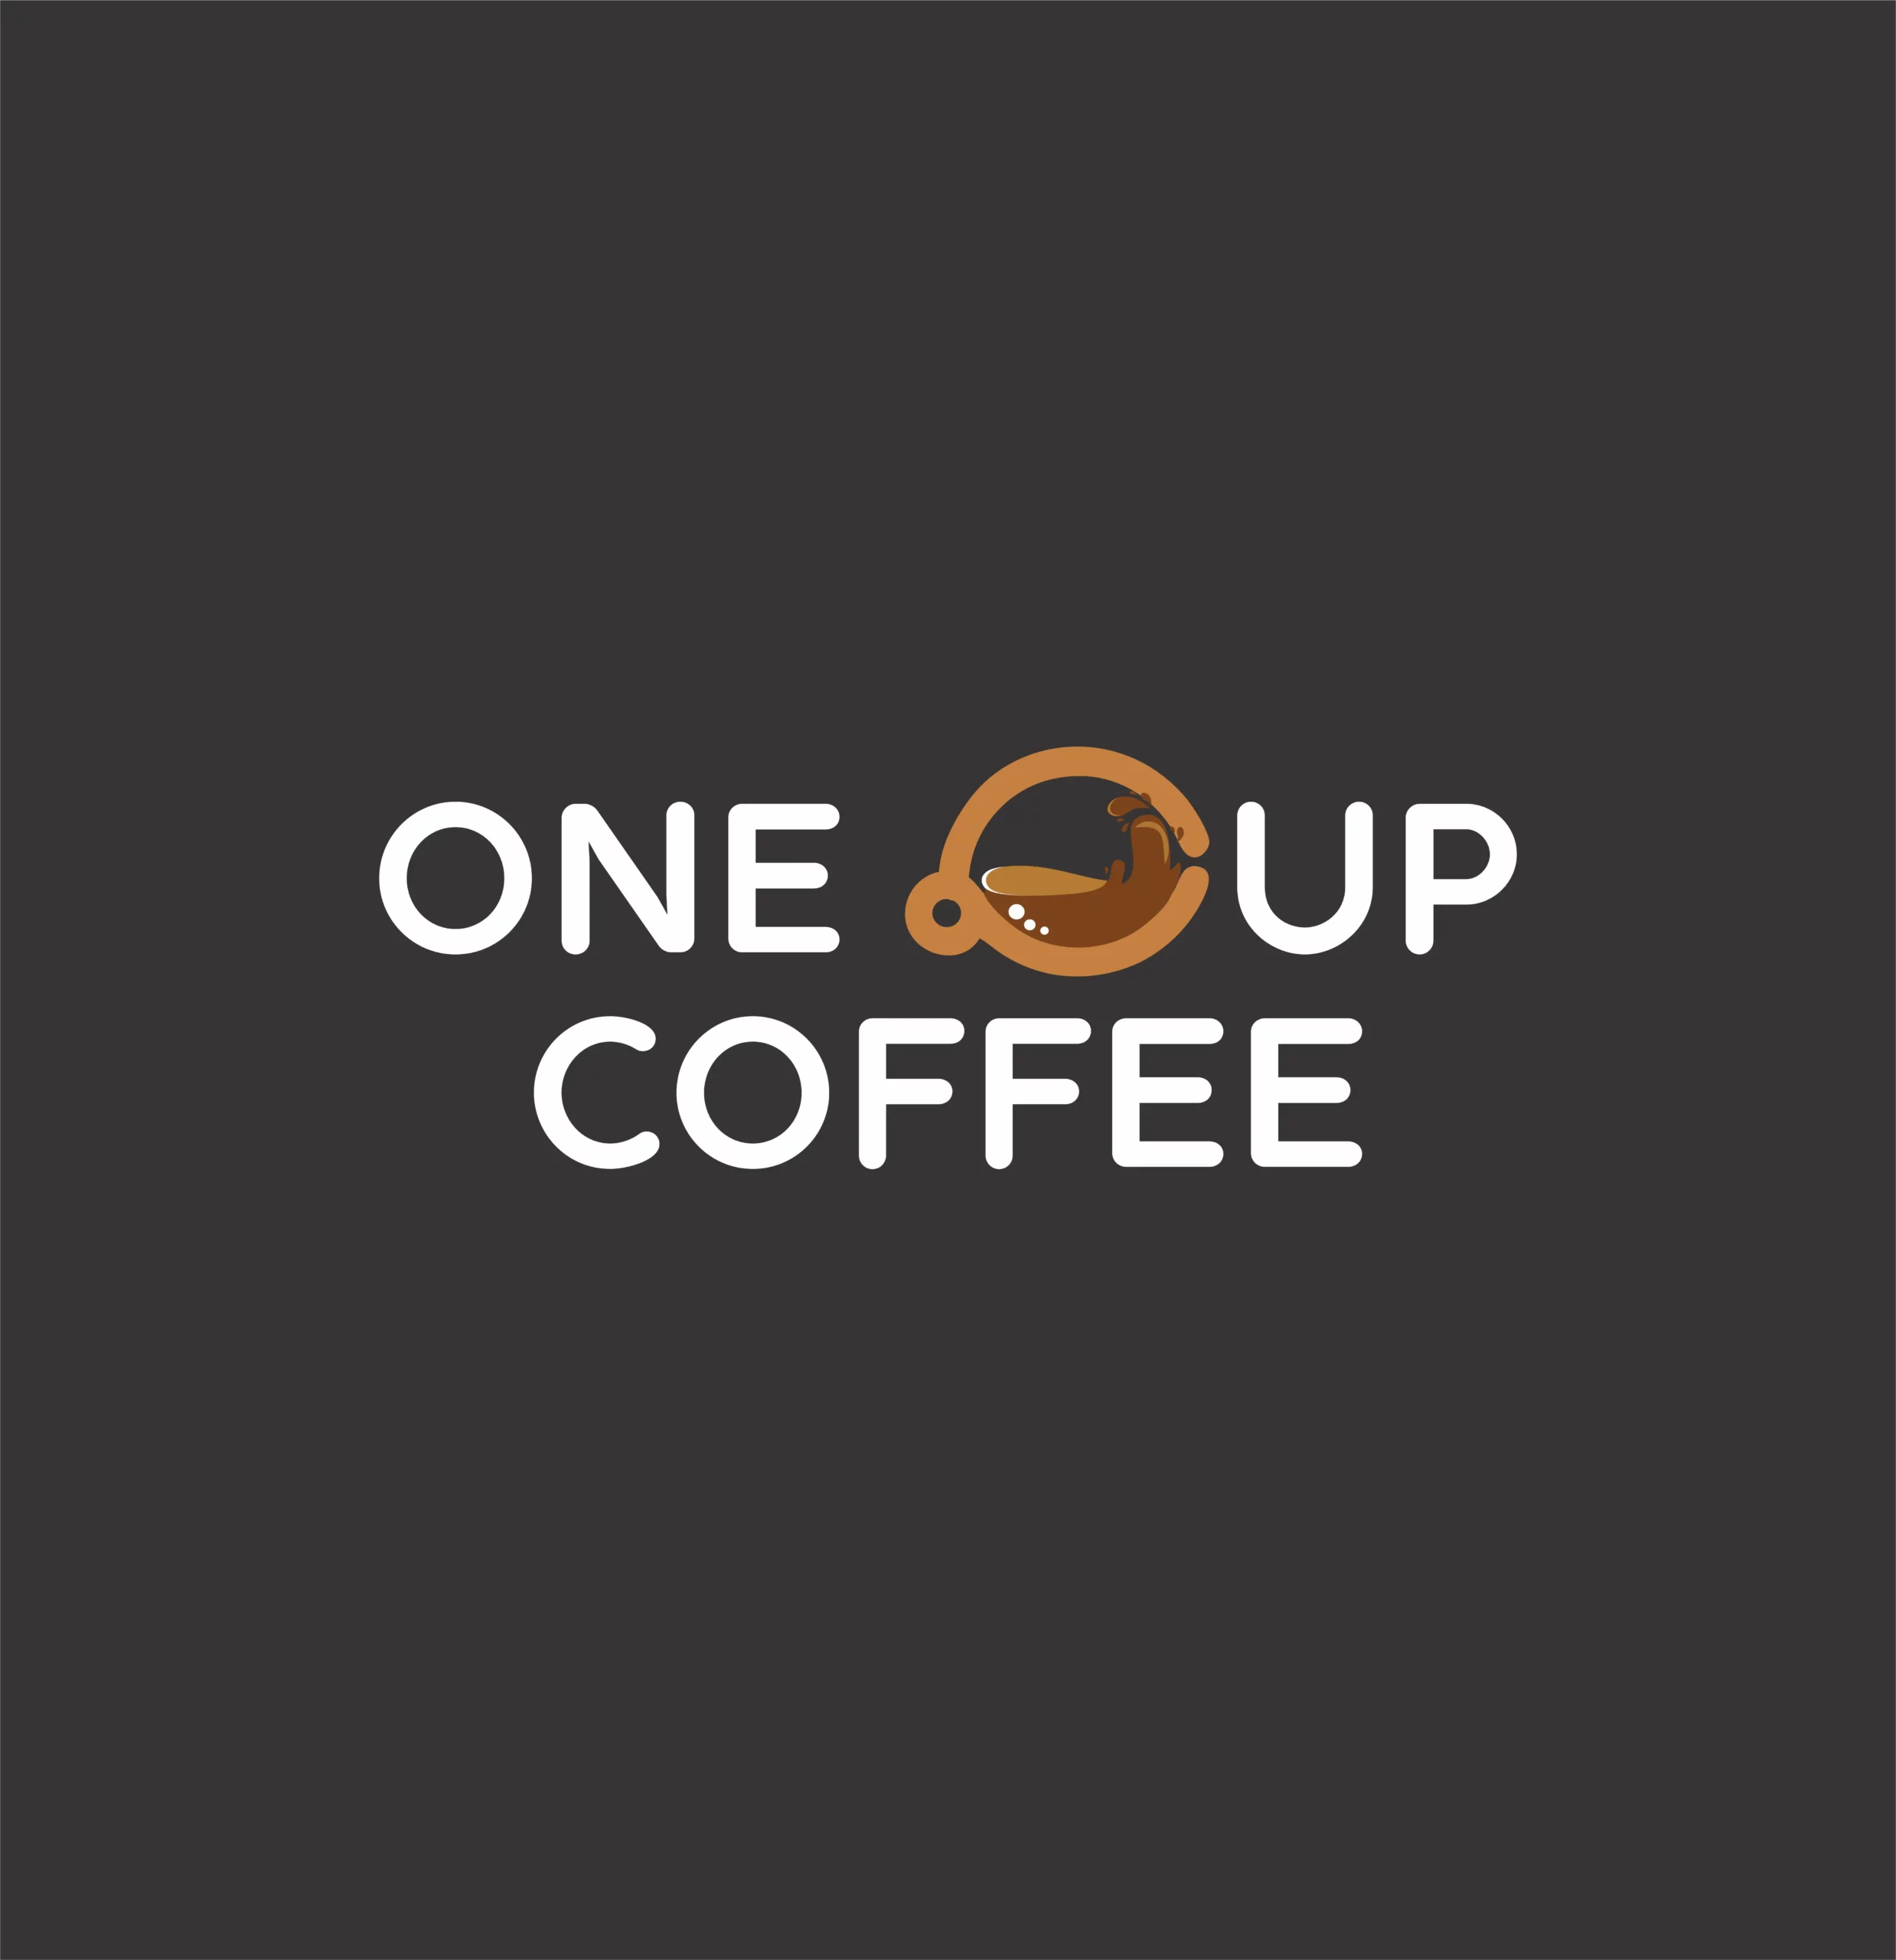 One cup coffee